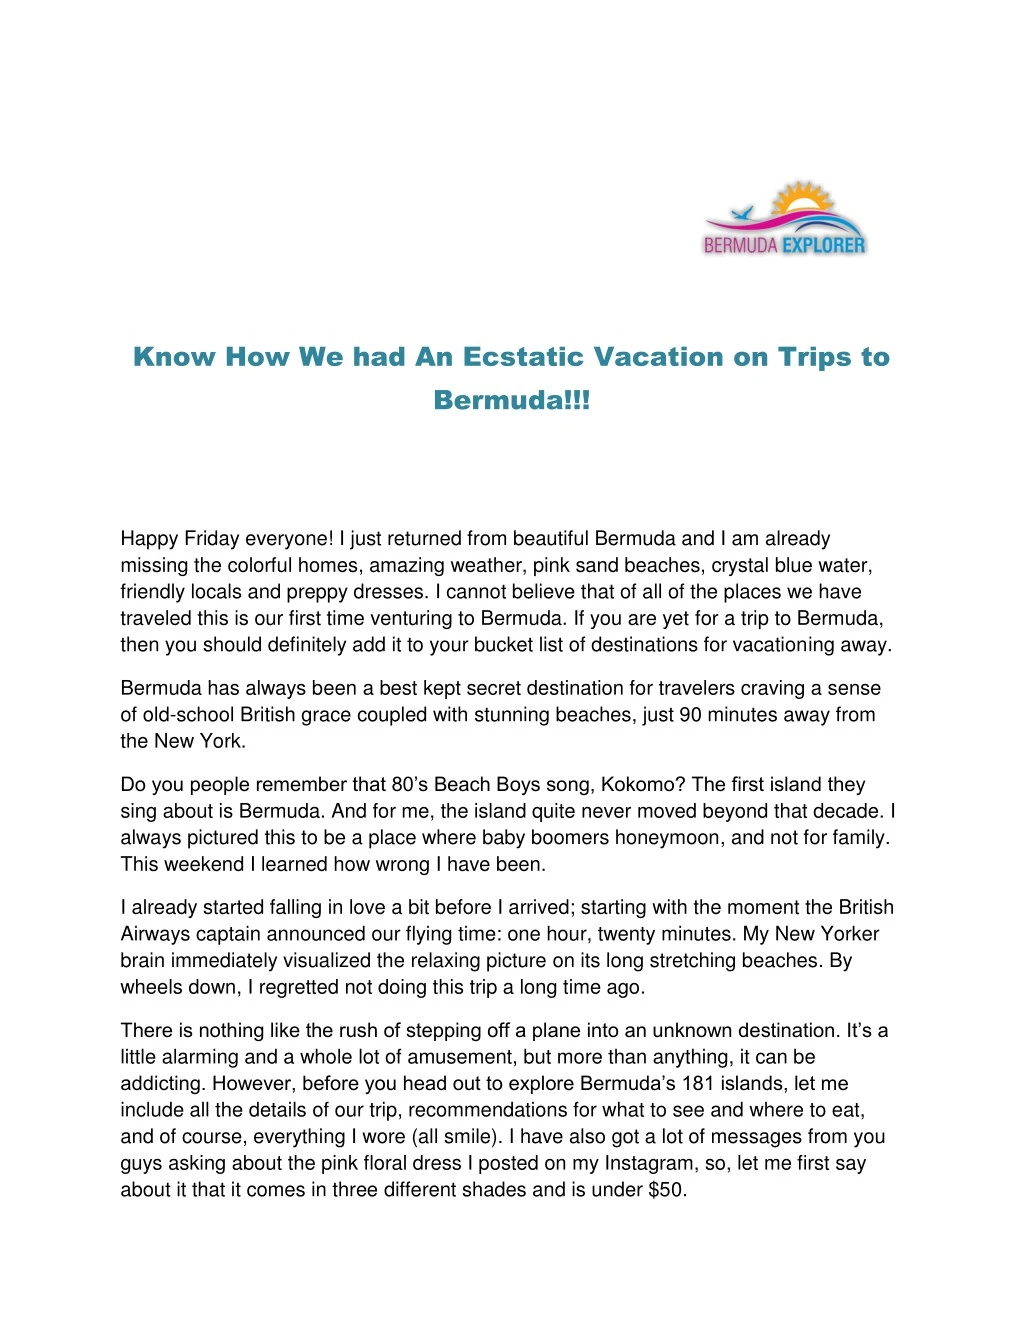 know how we had an ecstatic vacation on trips